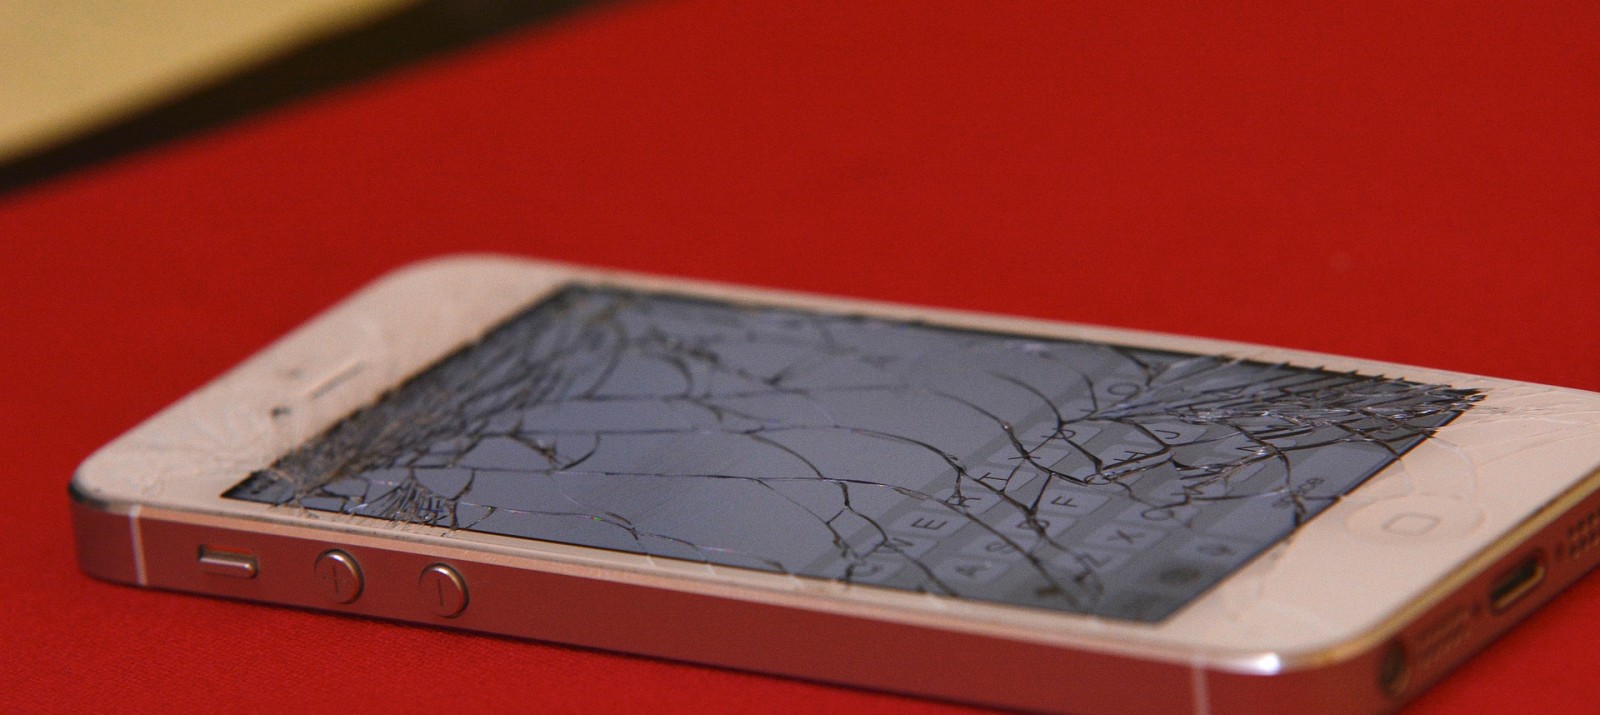 A cracked iPhone screen after a bad breakup.